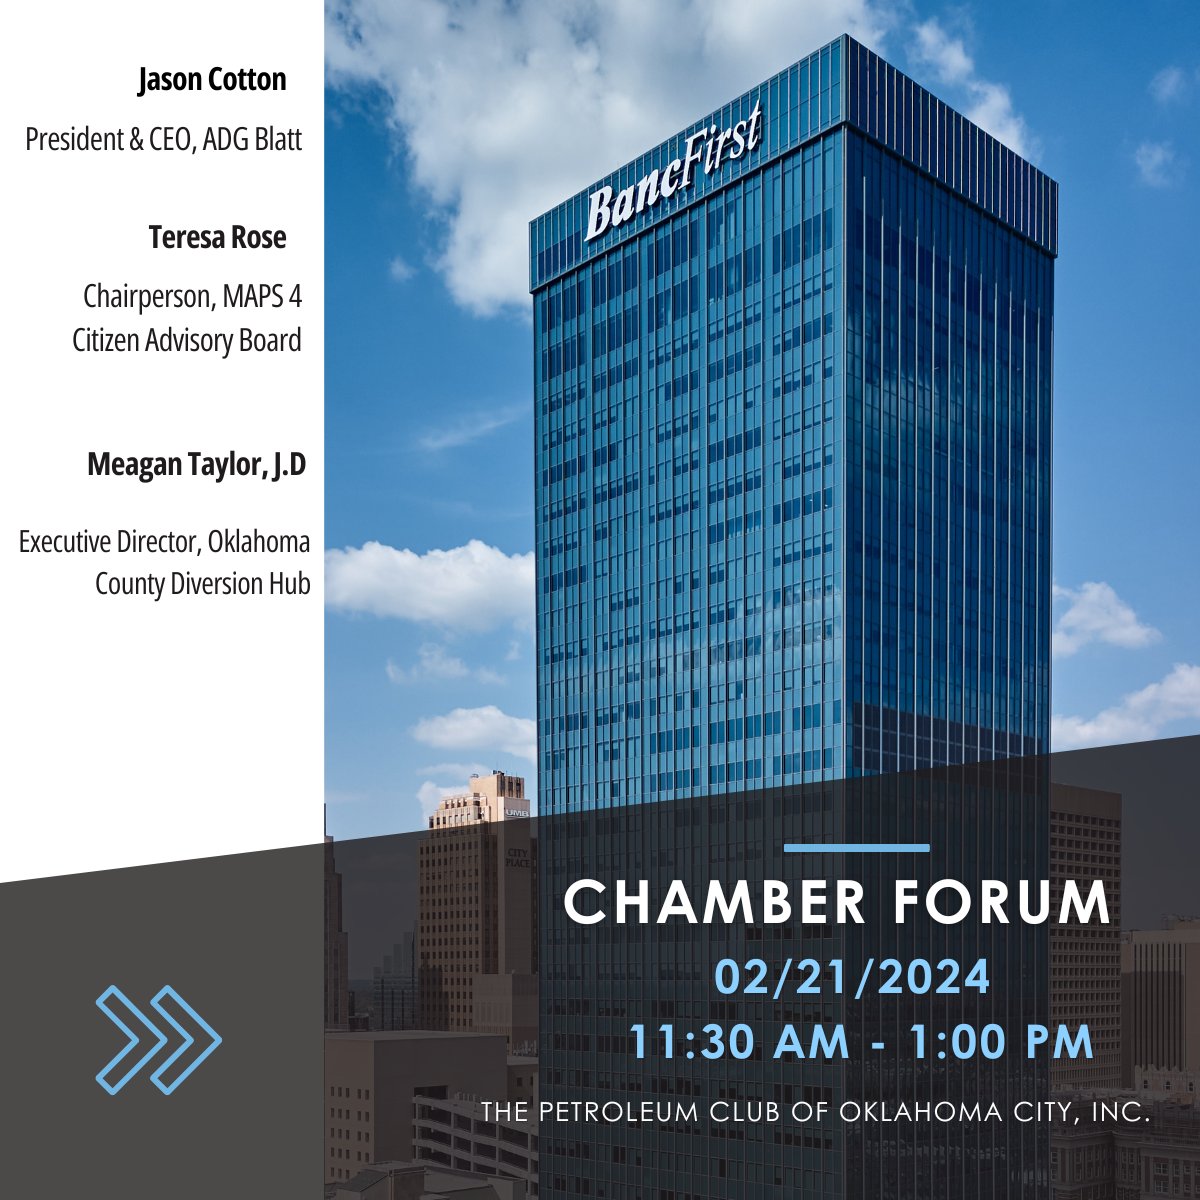 MAPS 4 continues the tradition of bringing monumental developments to our city yet provides a new layer of importance as we address the human needs of our community. Join us at the next Chamber Forum to learn the latest MAPS 4 developments & what's next: bit.ly/48hdbCX